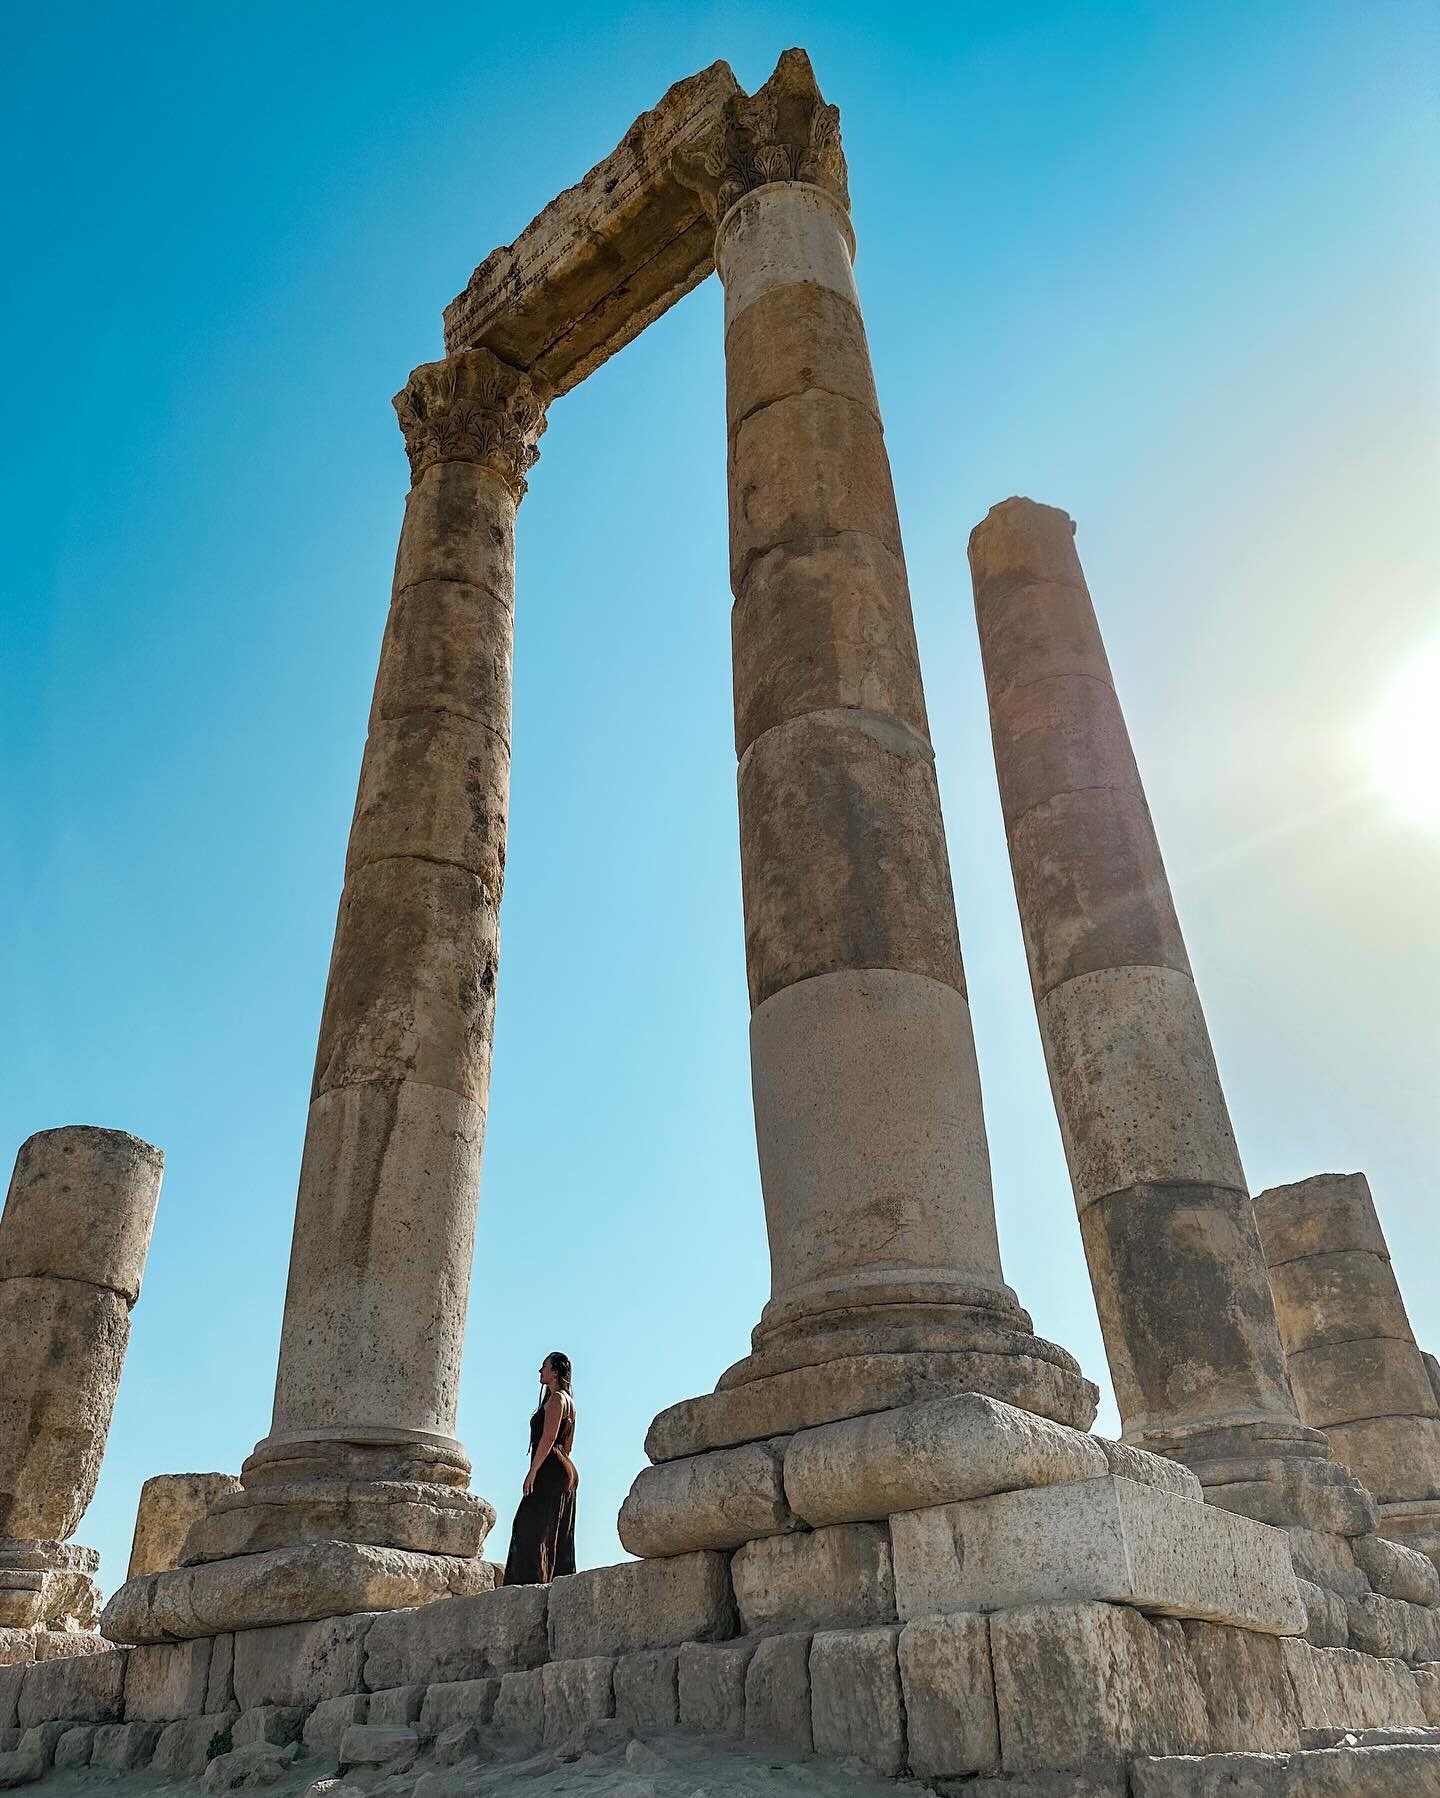 How often do you think about the Roman Empire?
&bull;
Nah but for real the Romans were everywhere. 
&bull;
I know I just got back, but I&rsquo;m ready to go trippin&rsquo; again. What&rsquo;s next on your list?
&bull;
#visitjordan #romanempire #trave